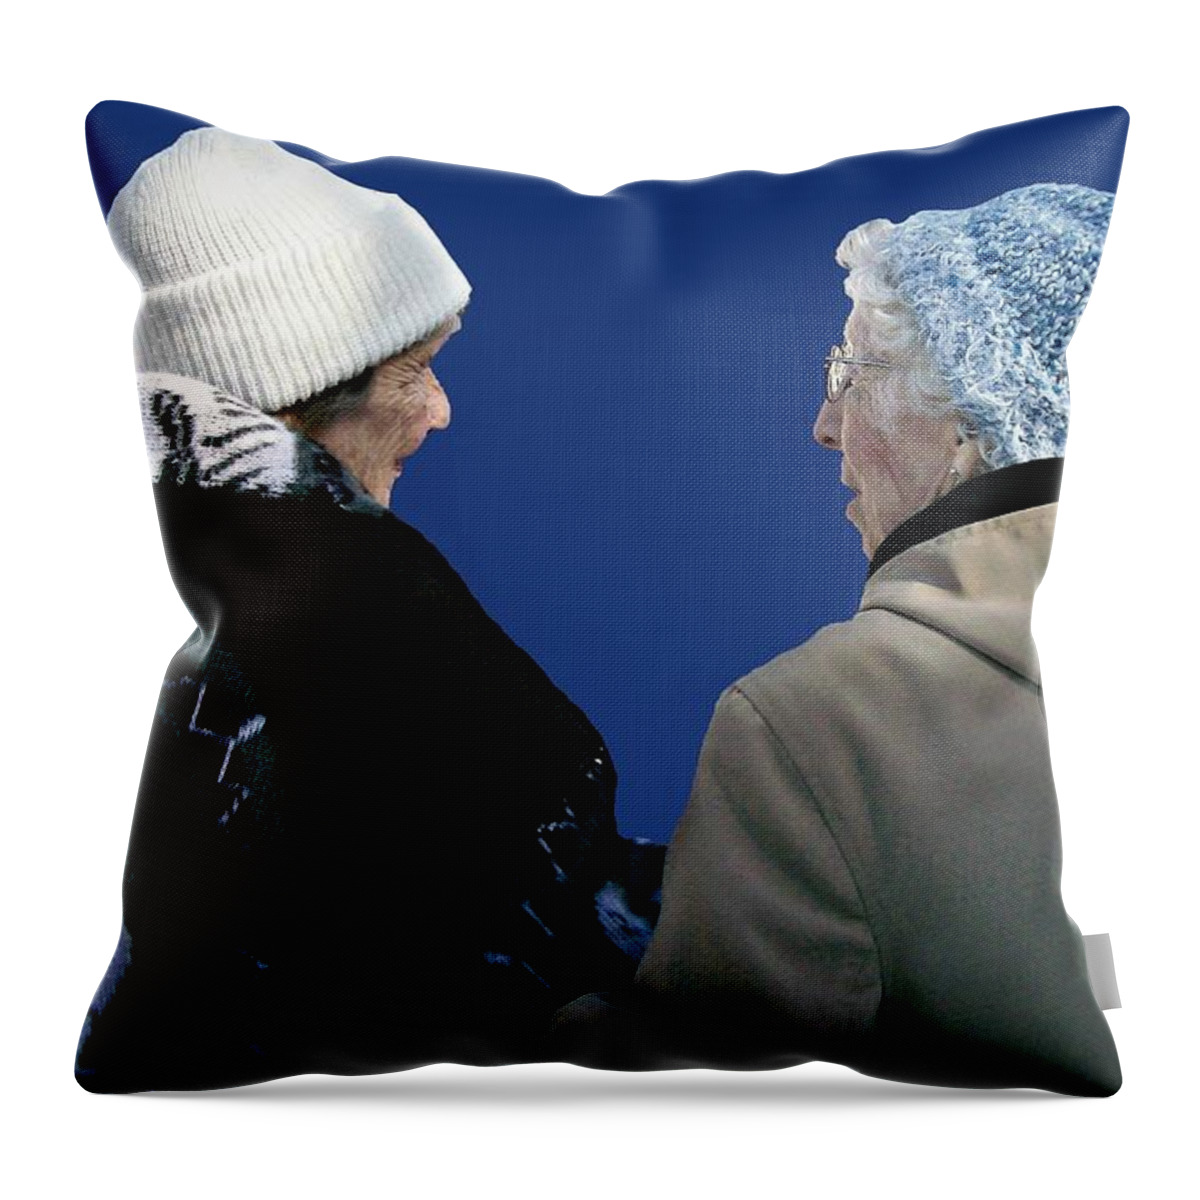 People Throw Pillow featuring the photograph Stepping Out by Barbara S Nickerson